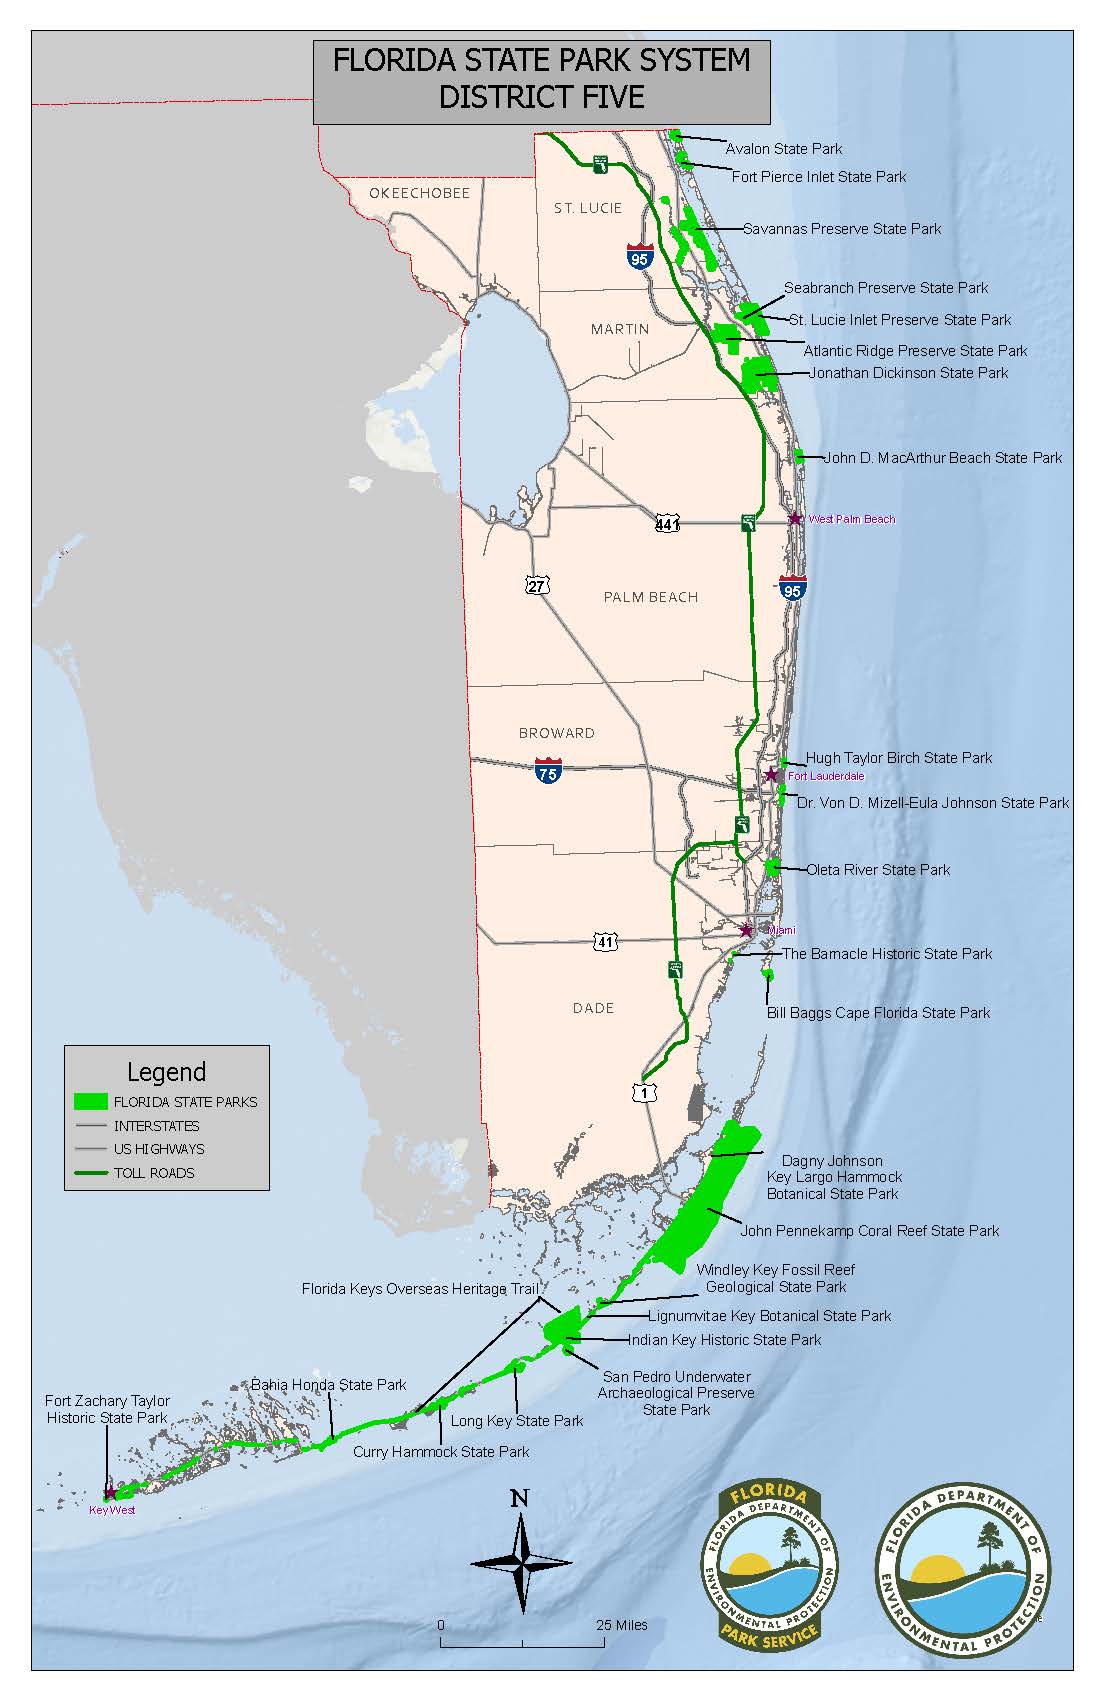 Florida State Parks District 5 Map